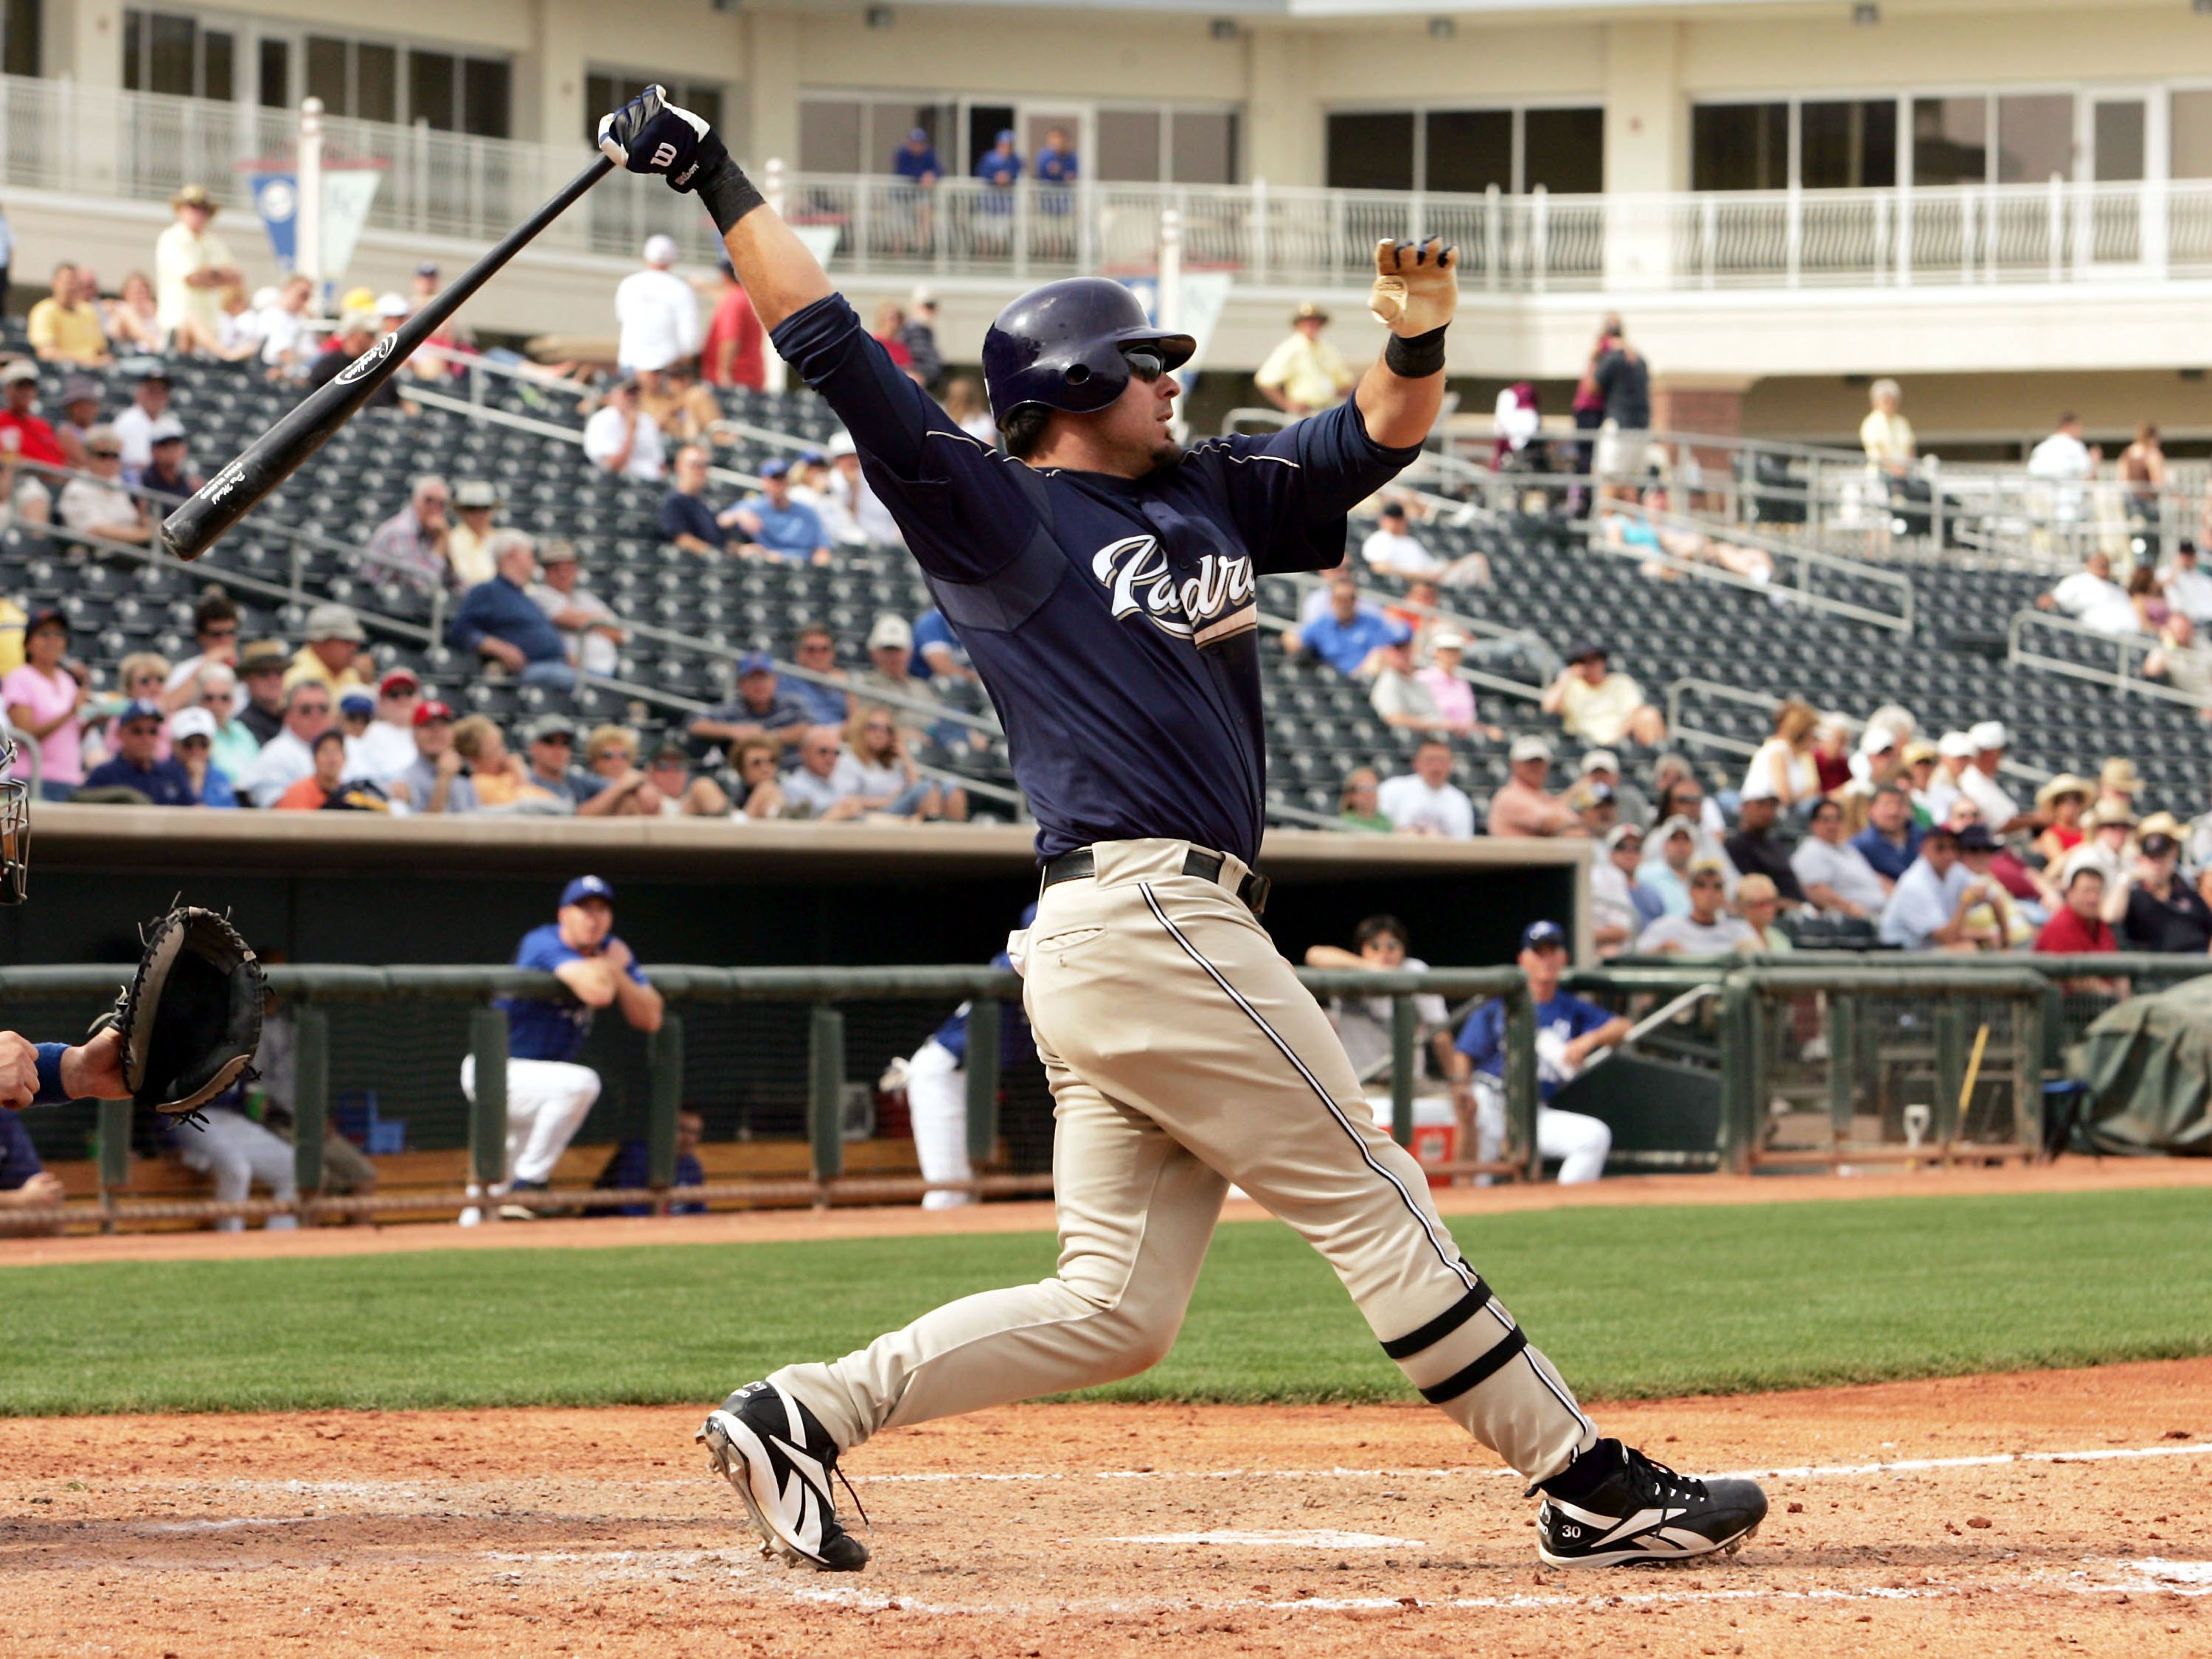 SURPRISE, AZ - MARCH 6:  Ryan Klesko #30 of the San Diego Padres bats against the Kansas City Royals in preseason action March 6, 2006 at Surprise Stadium in Surprise, Arizona. The Padres won 8-3.  (Photo by Stephen Dunn /Getty Images)